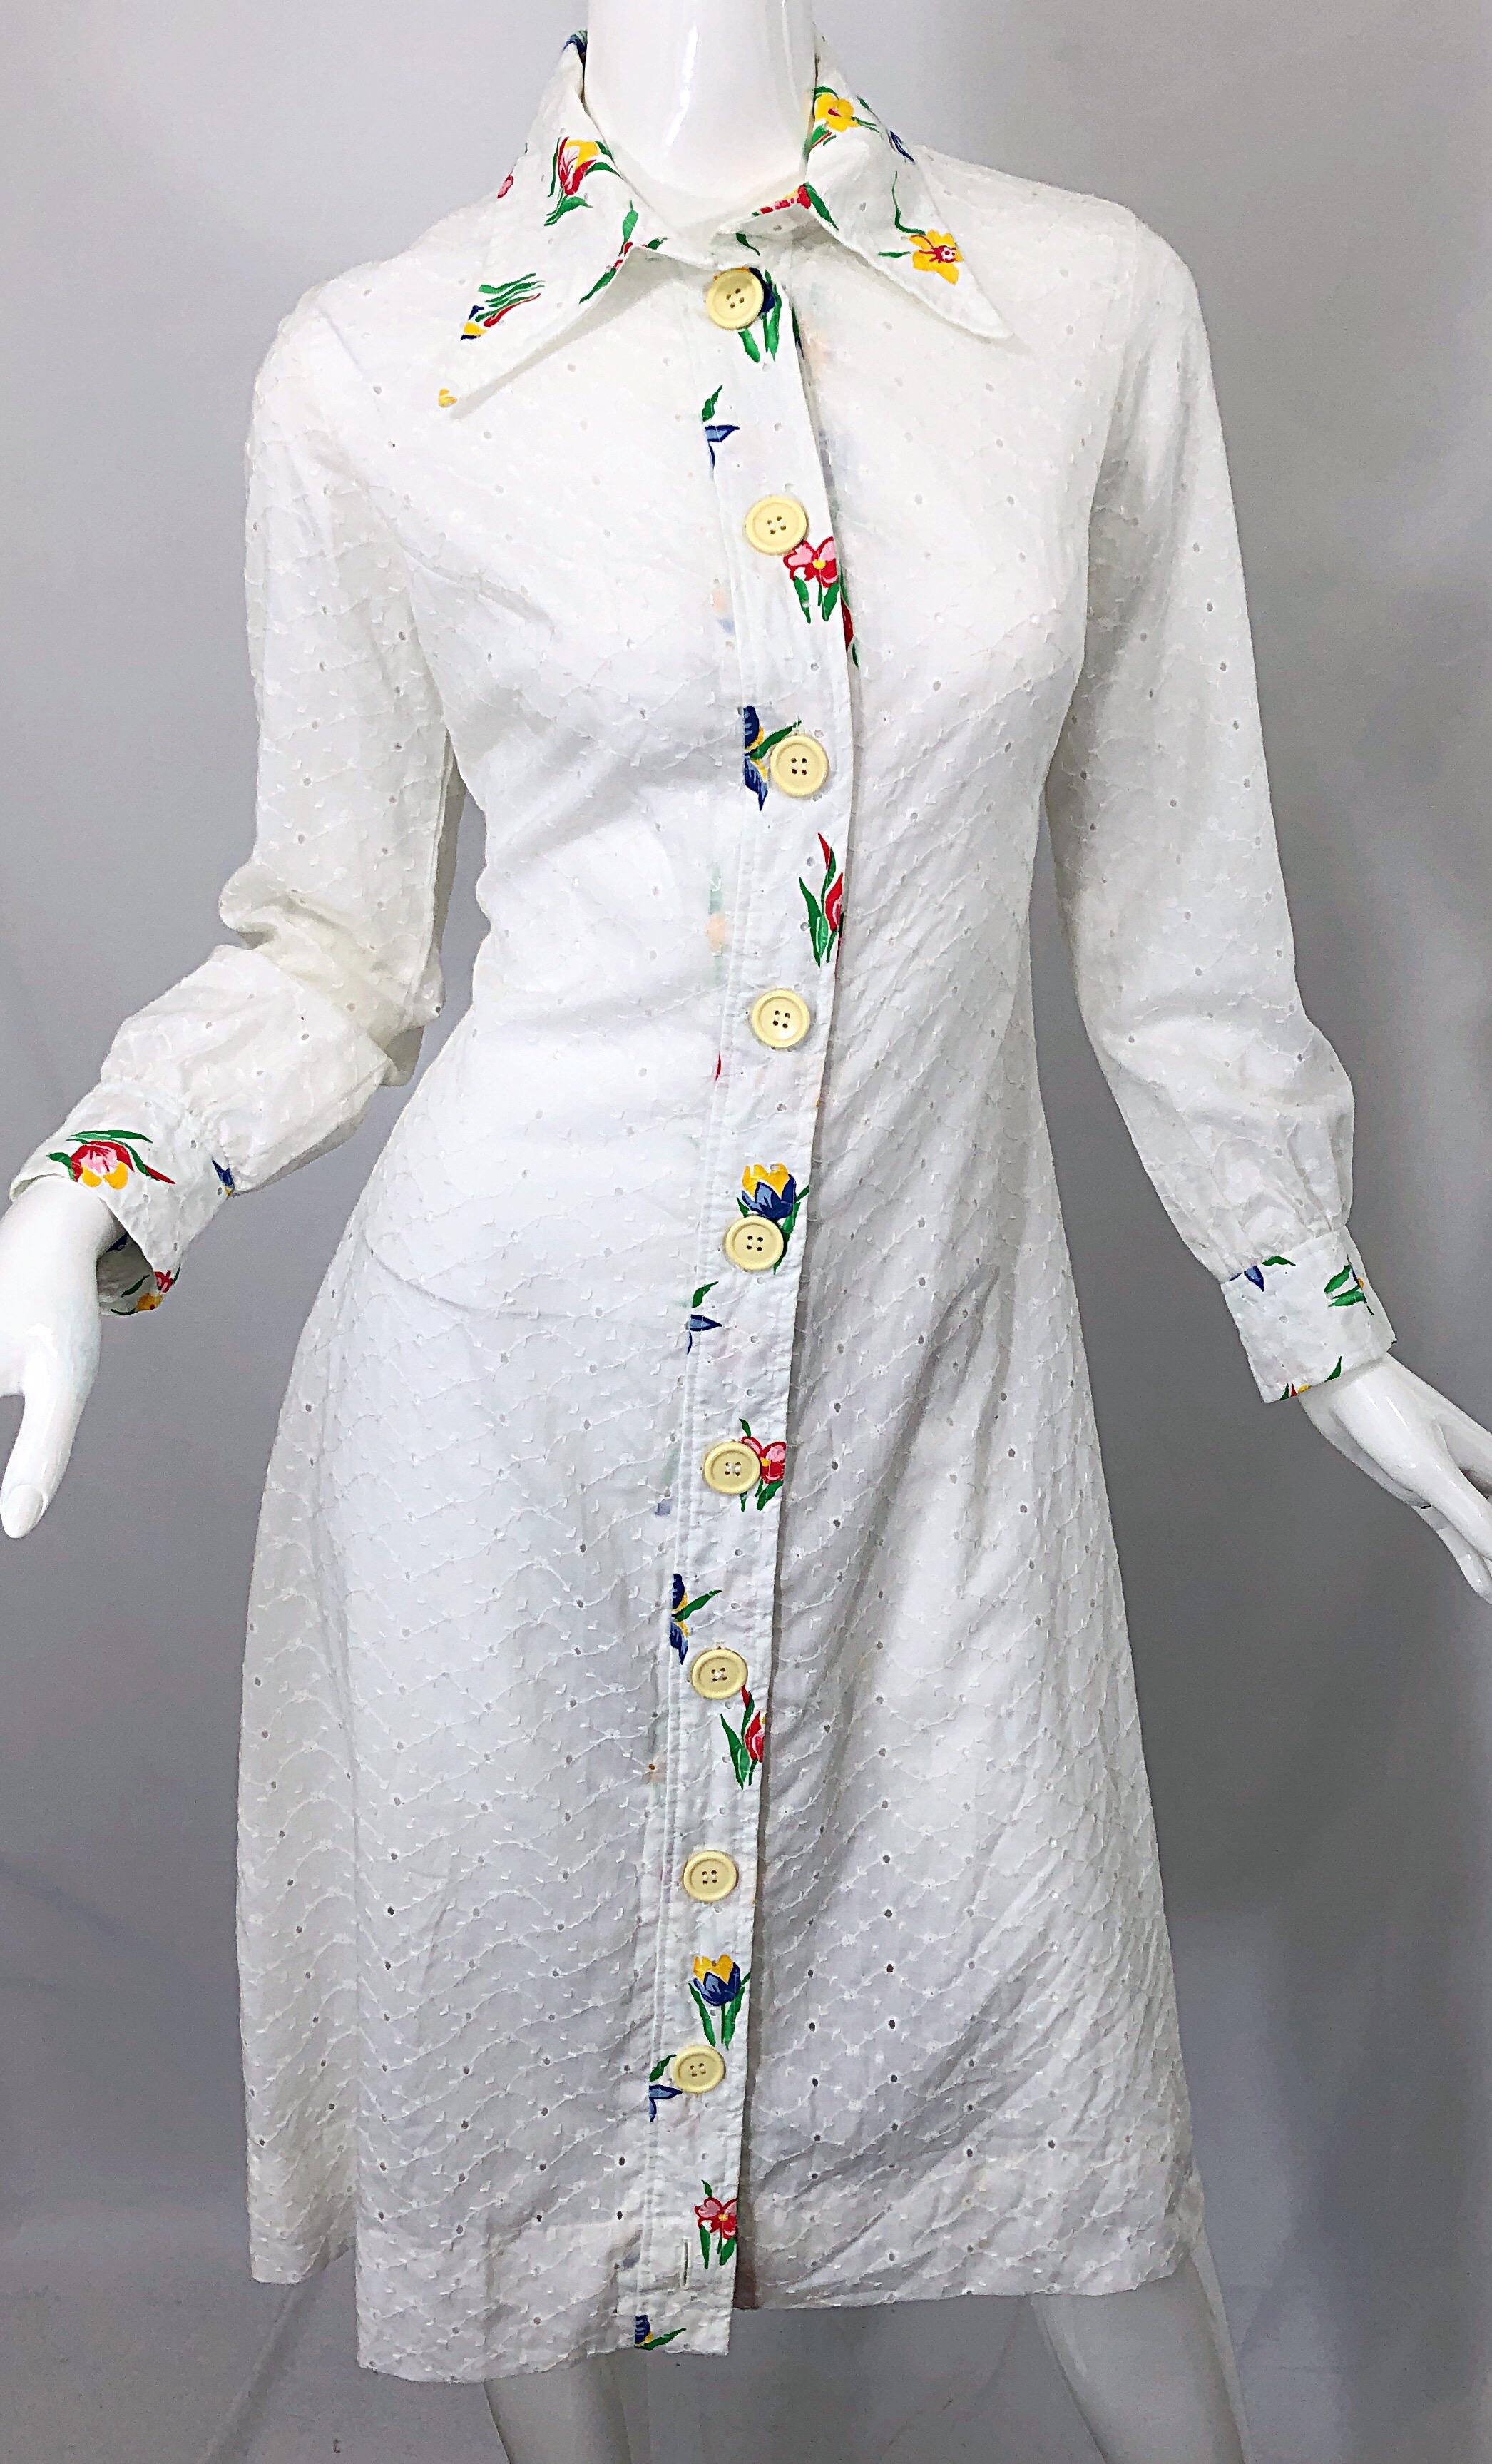 1970s Joseph Magnin White Eyelet Cotton Embrodiered Vintage 70s Shirt Dress For Sale 5